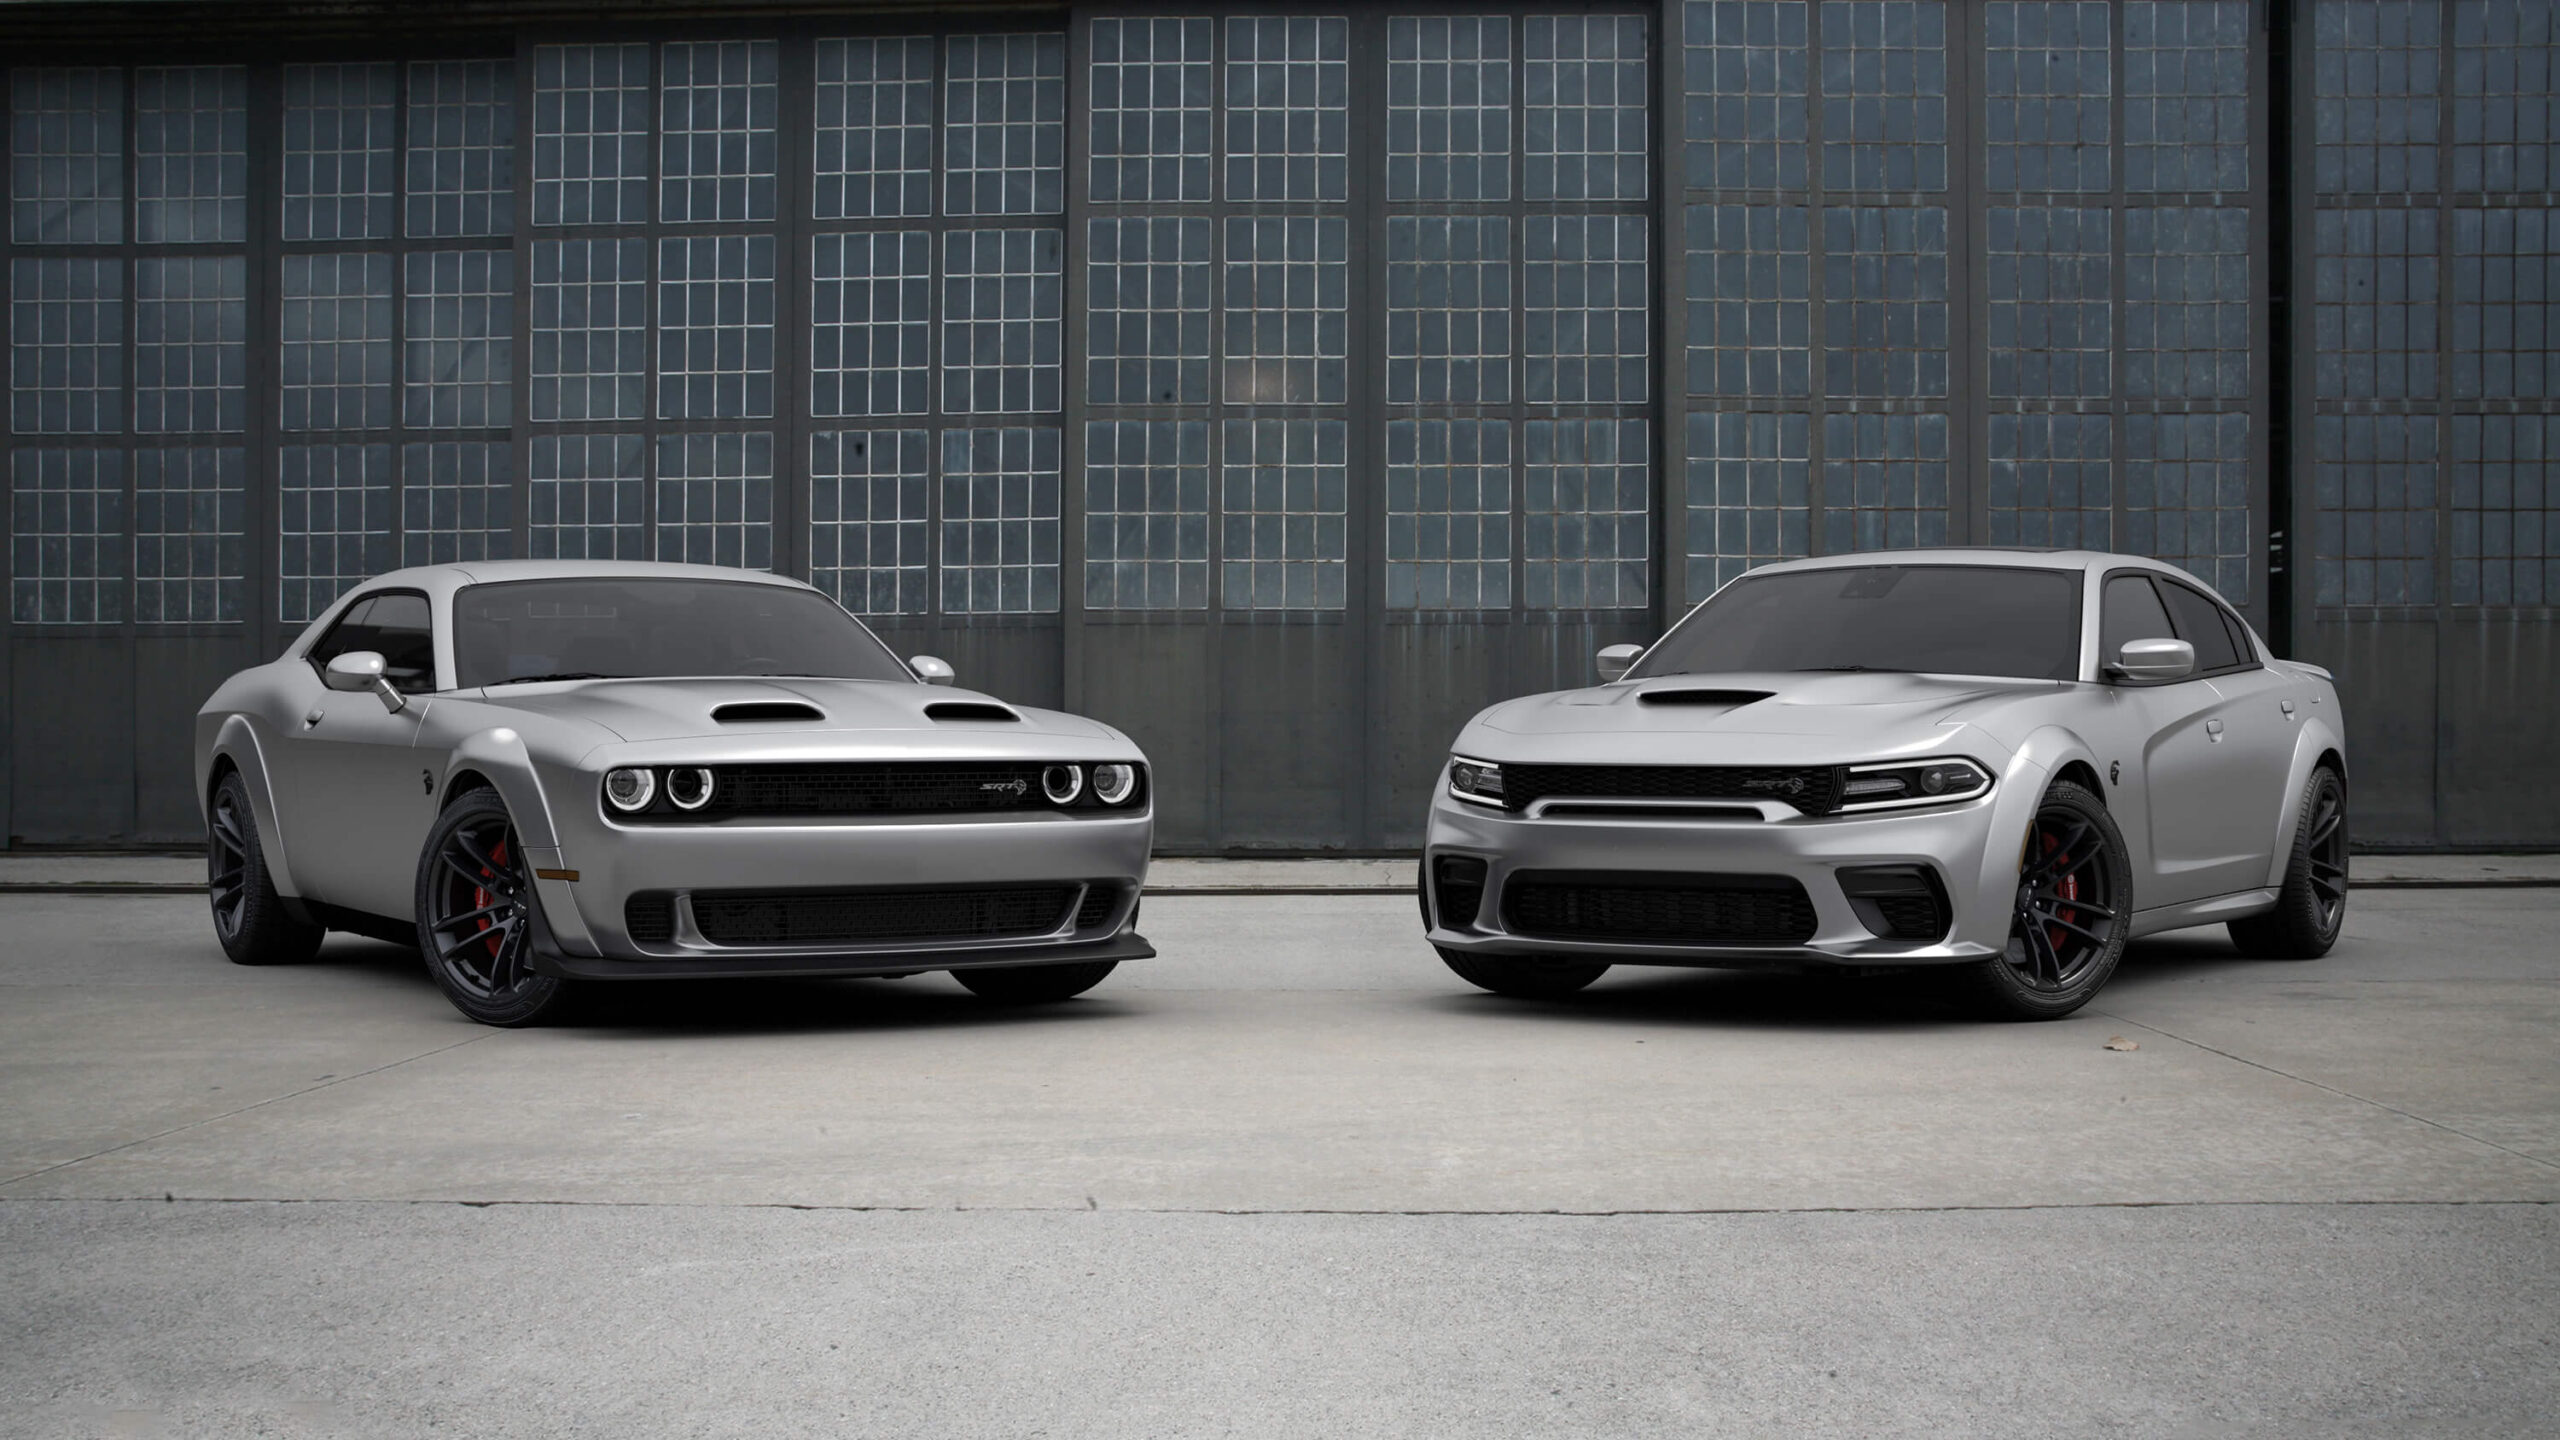 Dodge “Last Call” in Europe goes on with the Challenger R/T Scat